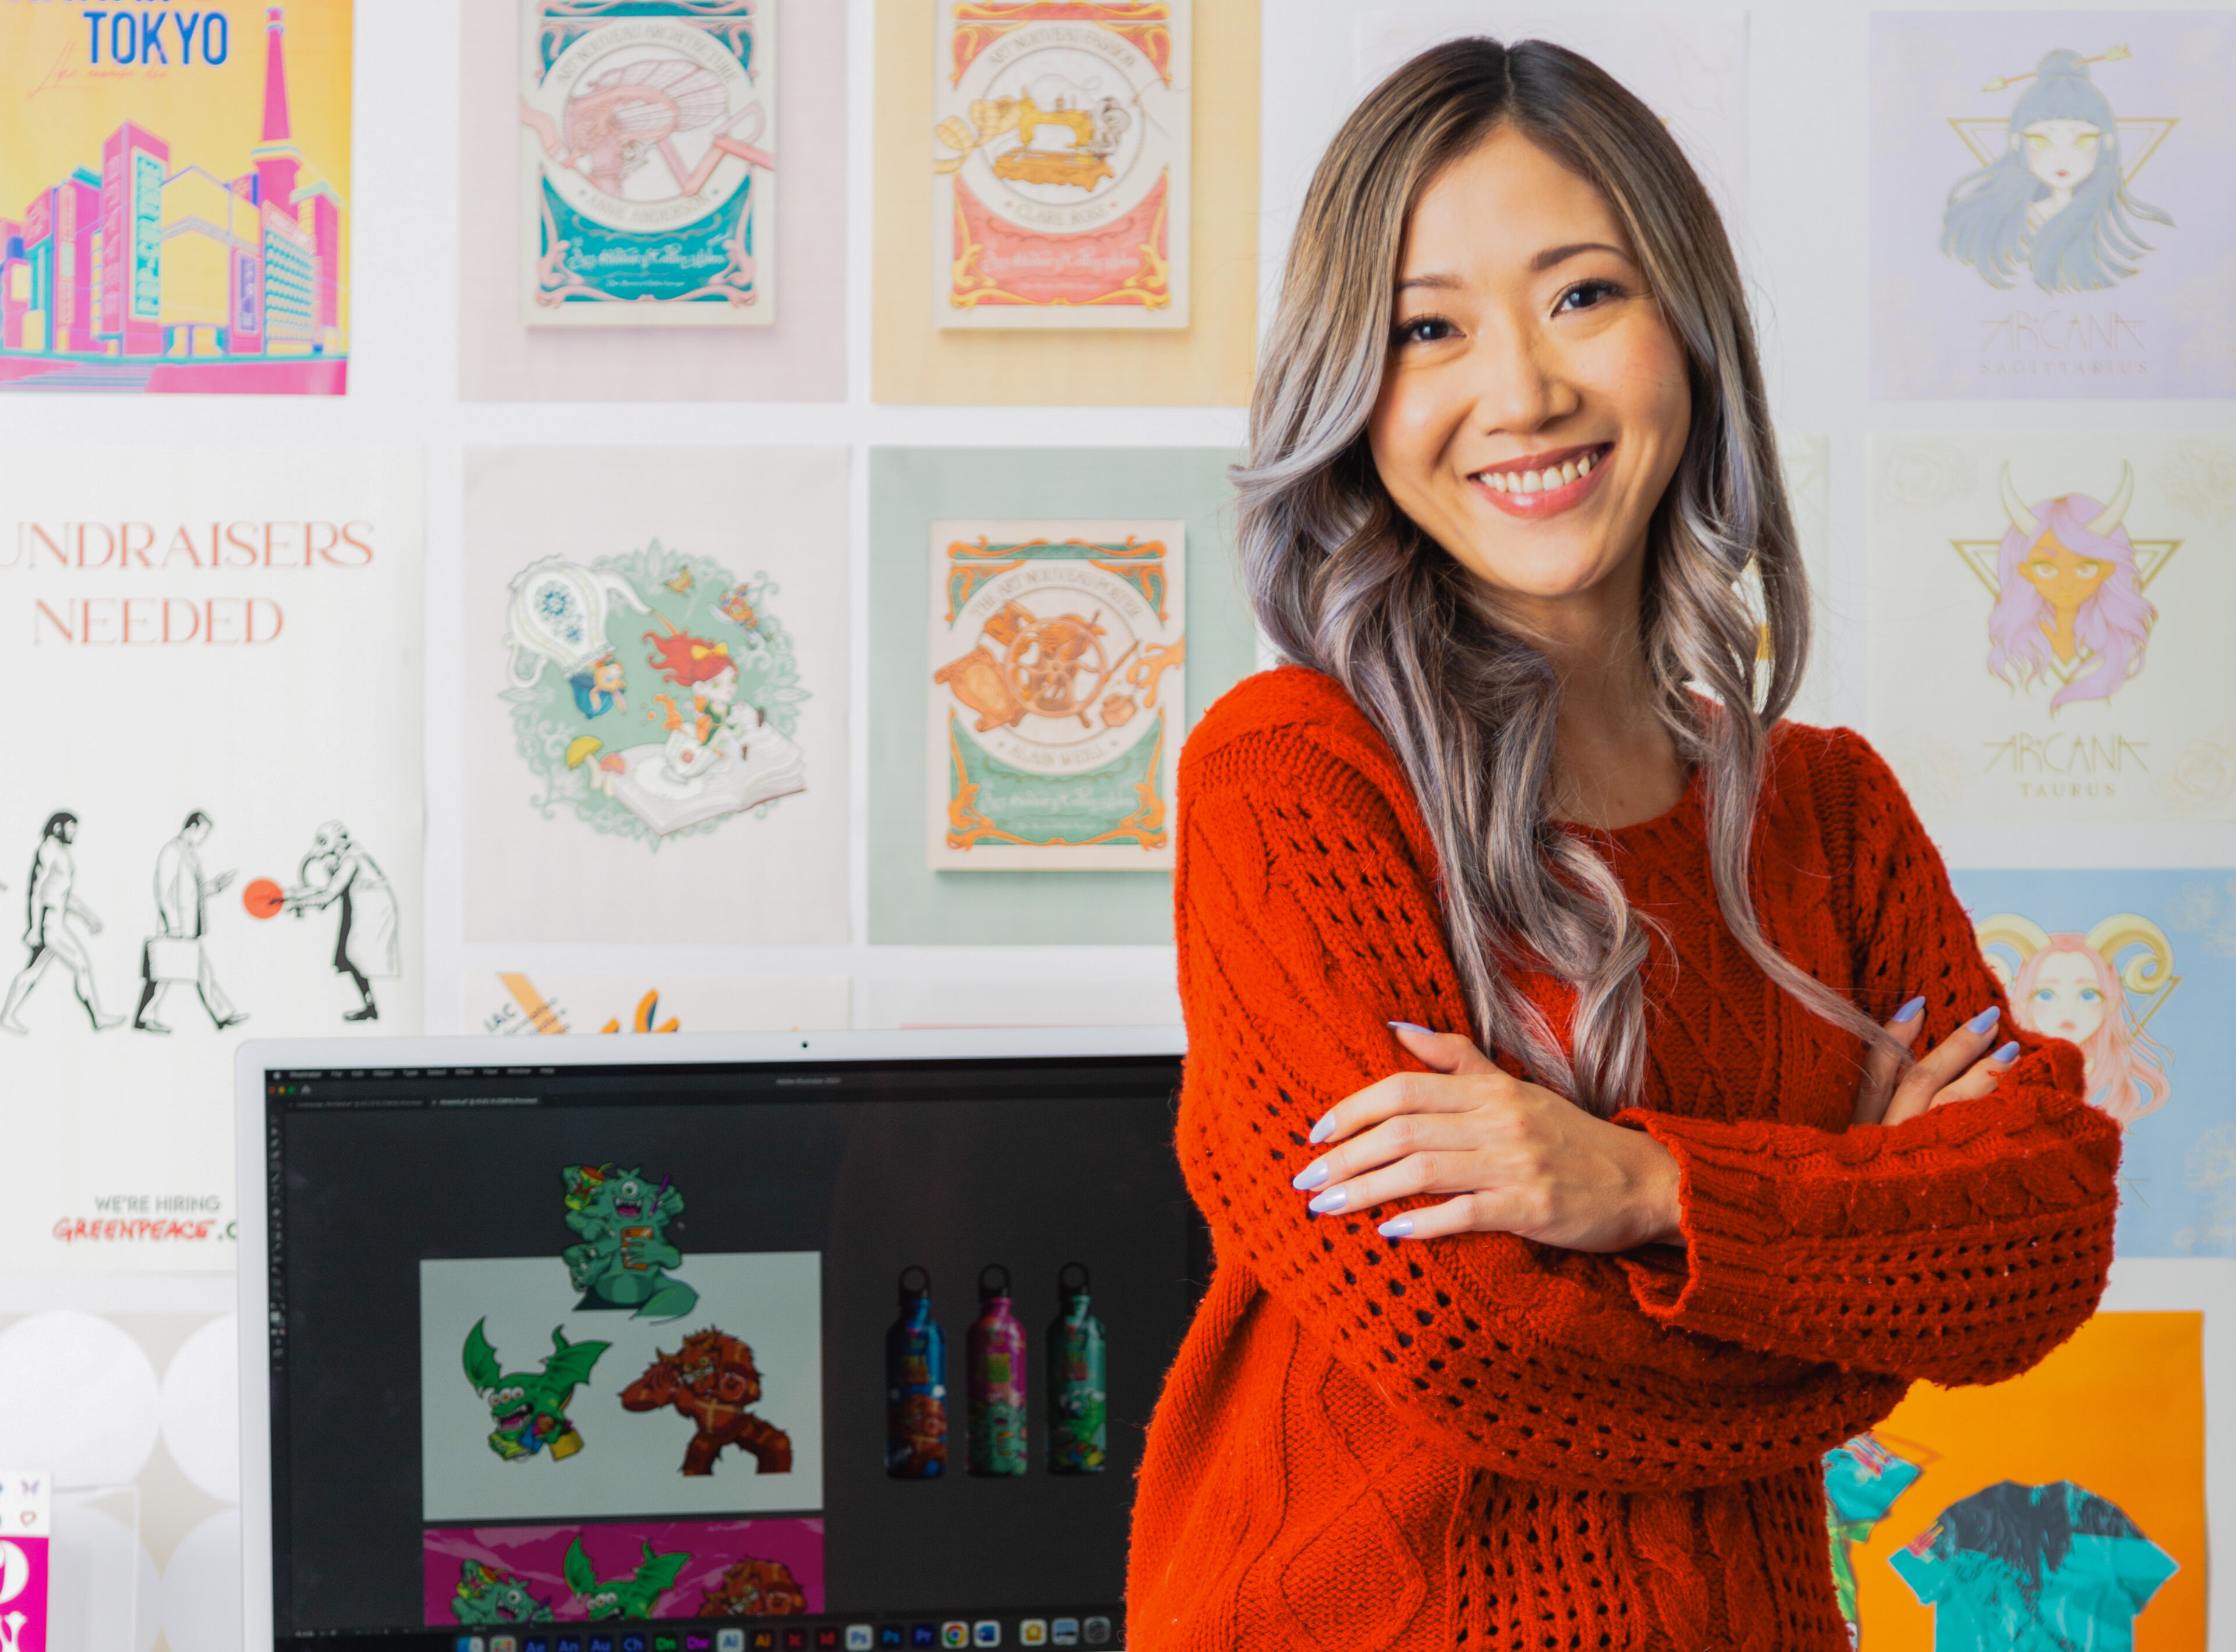 A smiling woman in a red sweater stands before her colorful artwork, which includes character illustrations and graphics on the wall and computer.